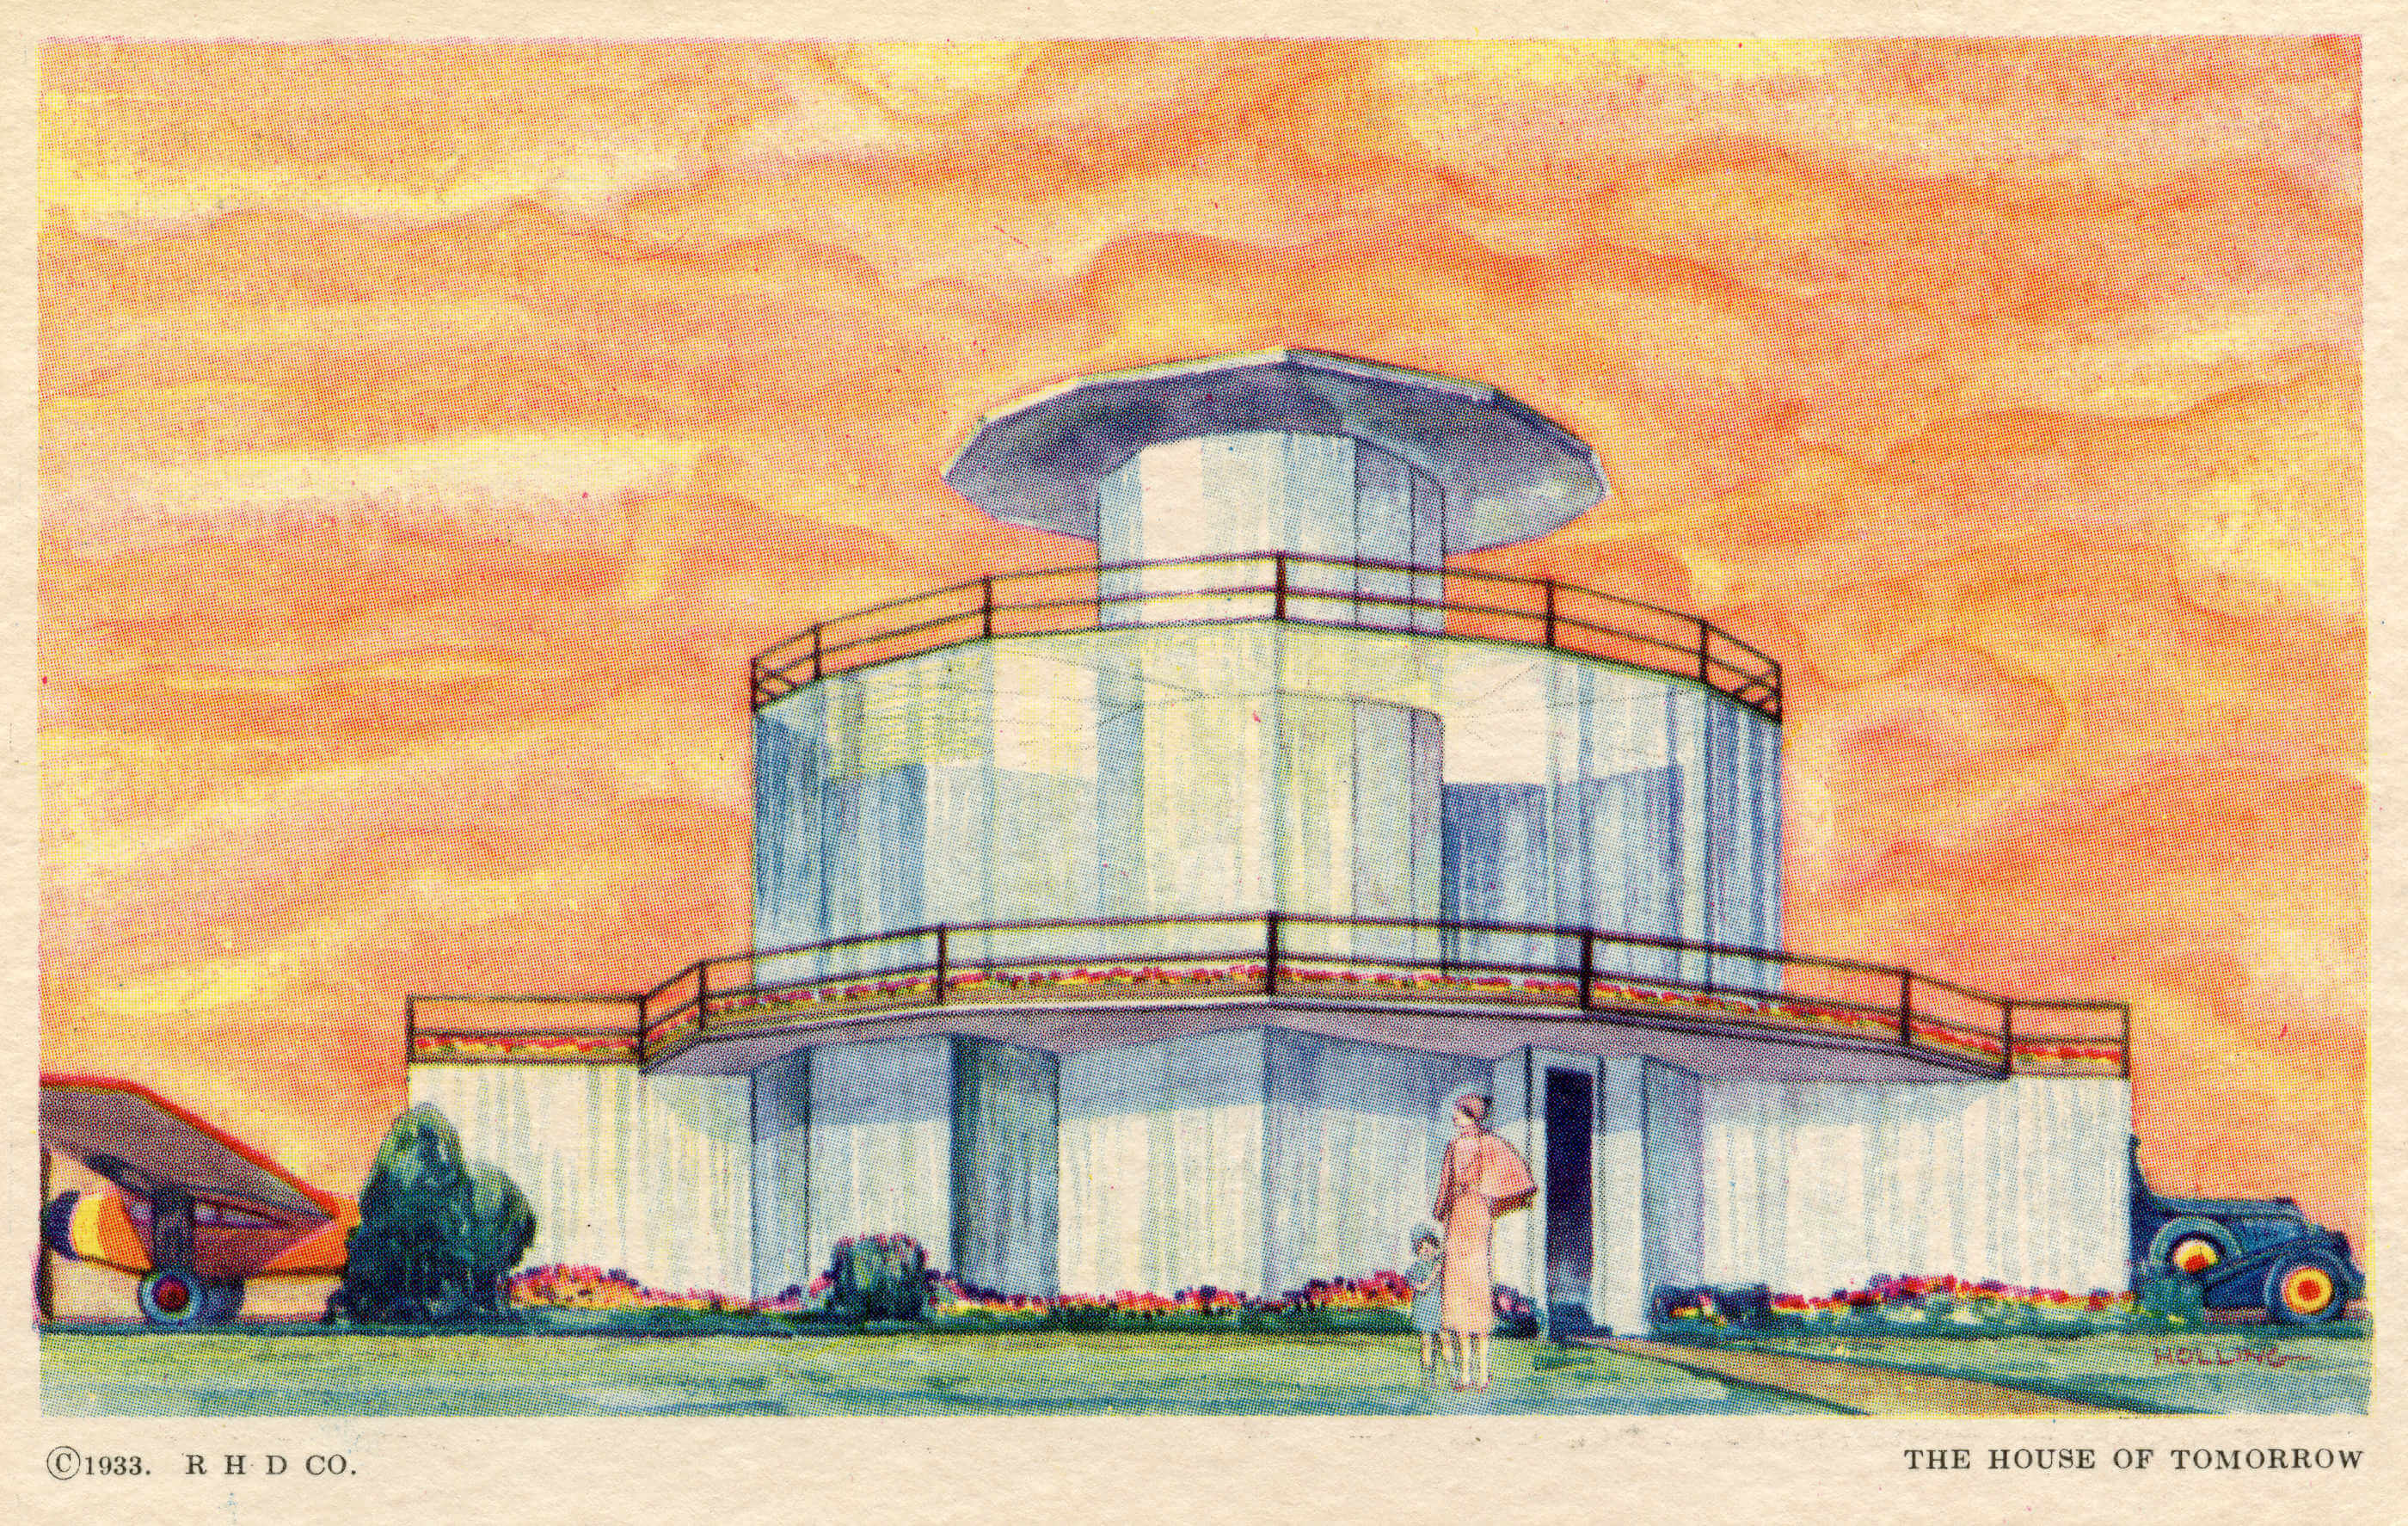 vintage drawing of a circular futuristic house